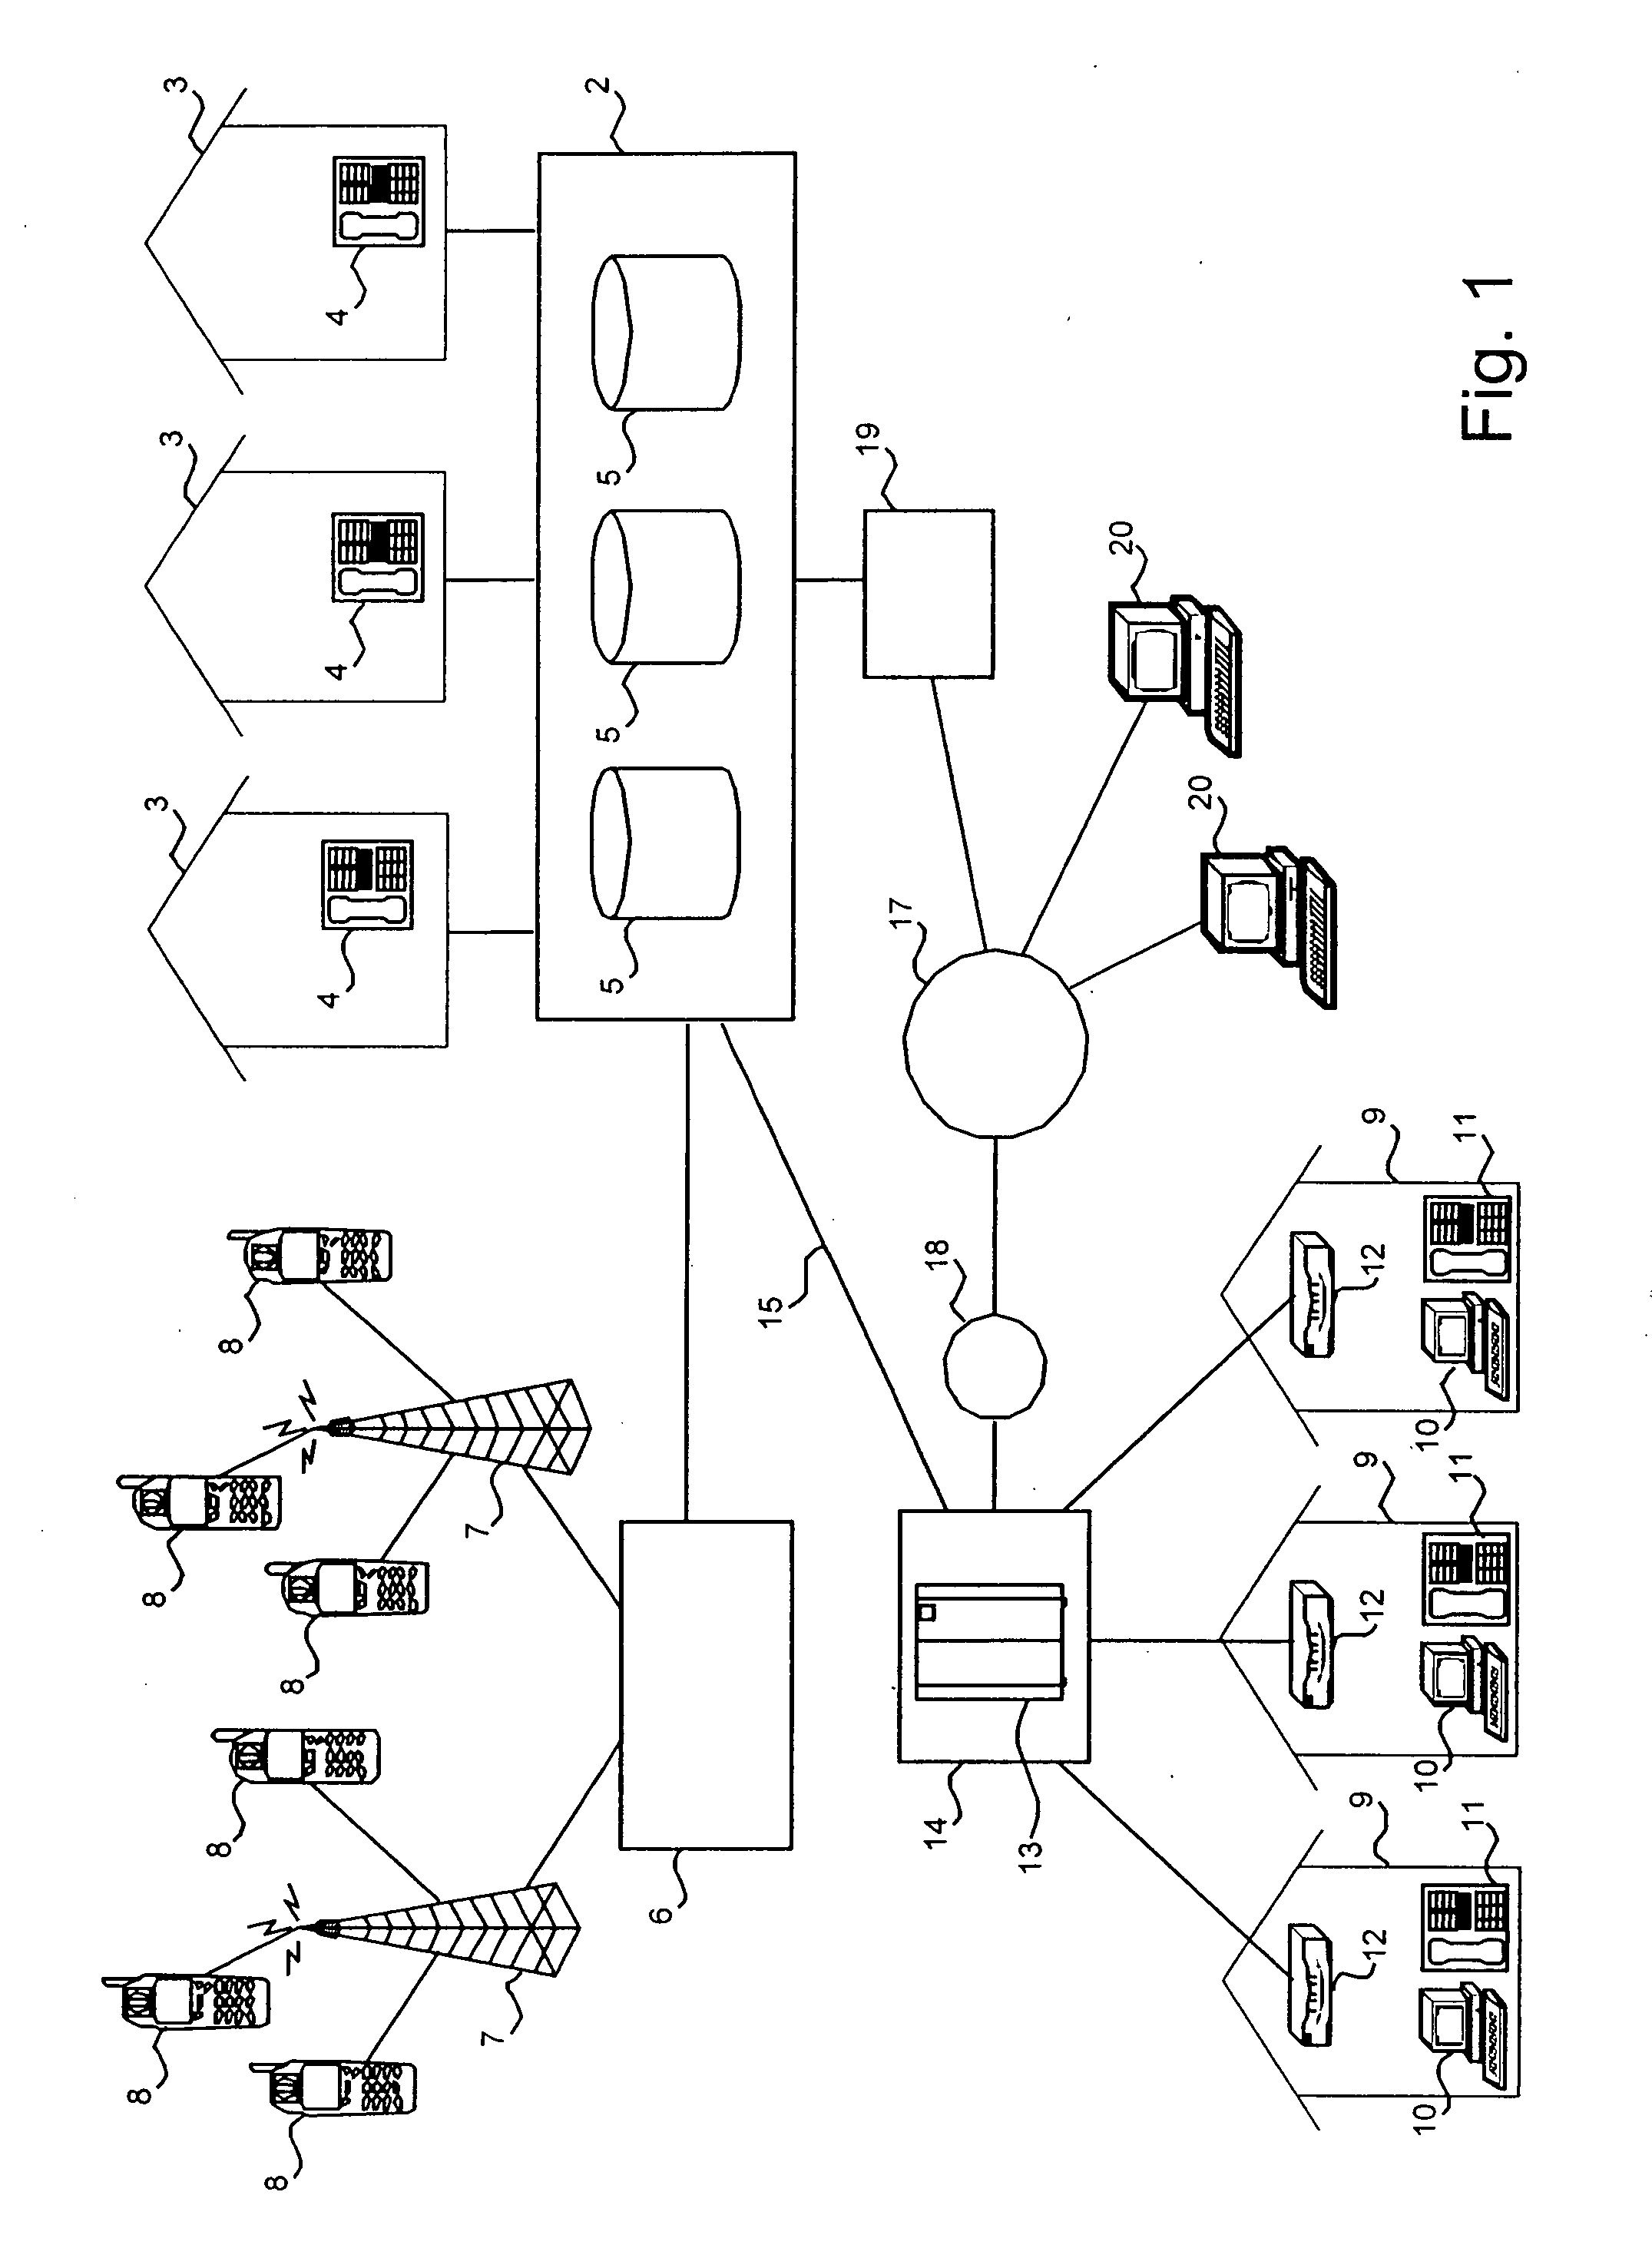 Method for linking call log information to address book entries and replying using medium of choice